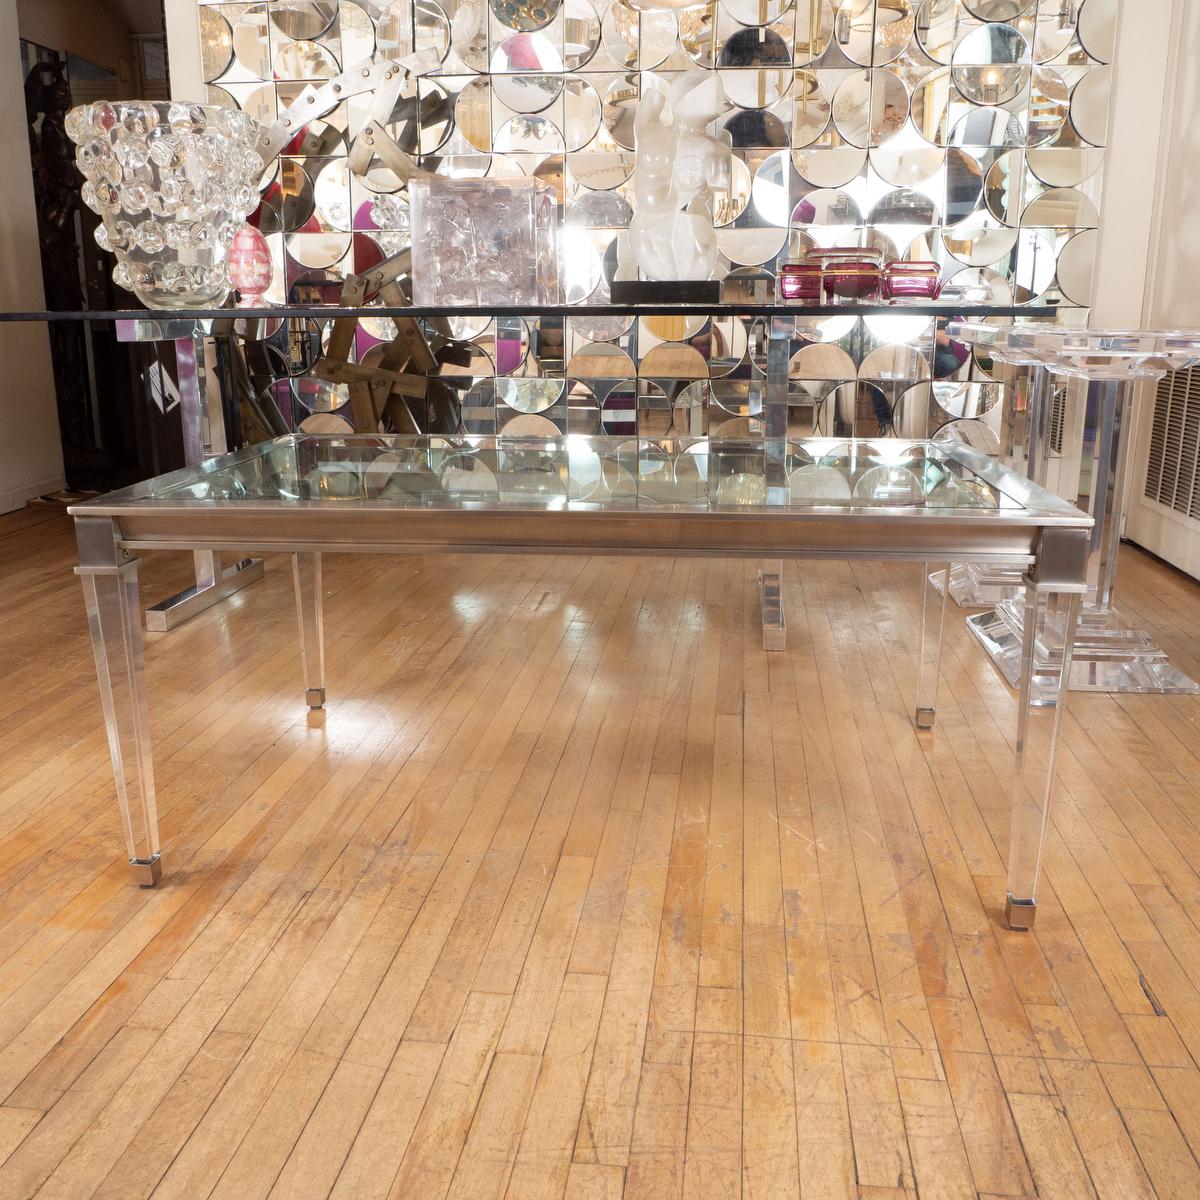 Rectangular brushed nickel and glass coffee table.